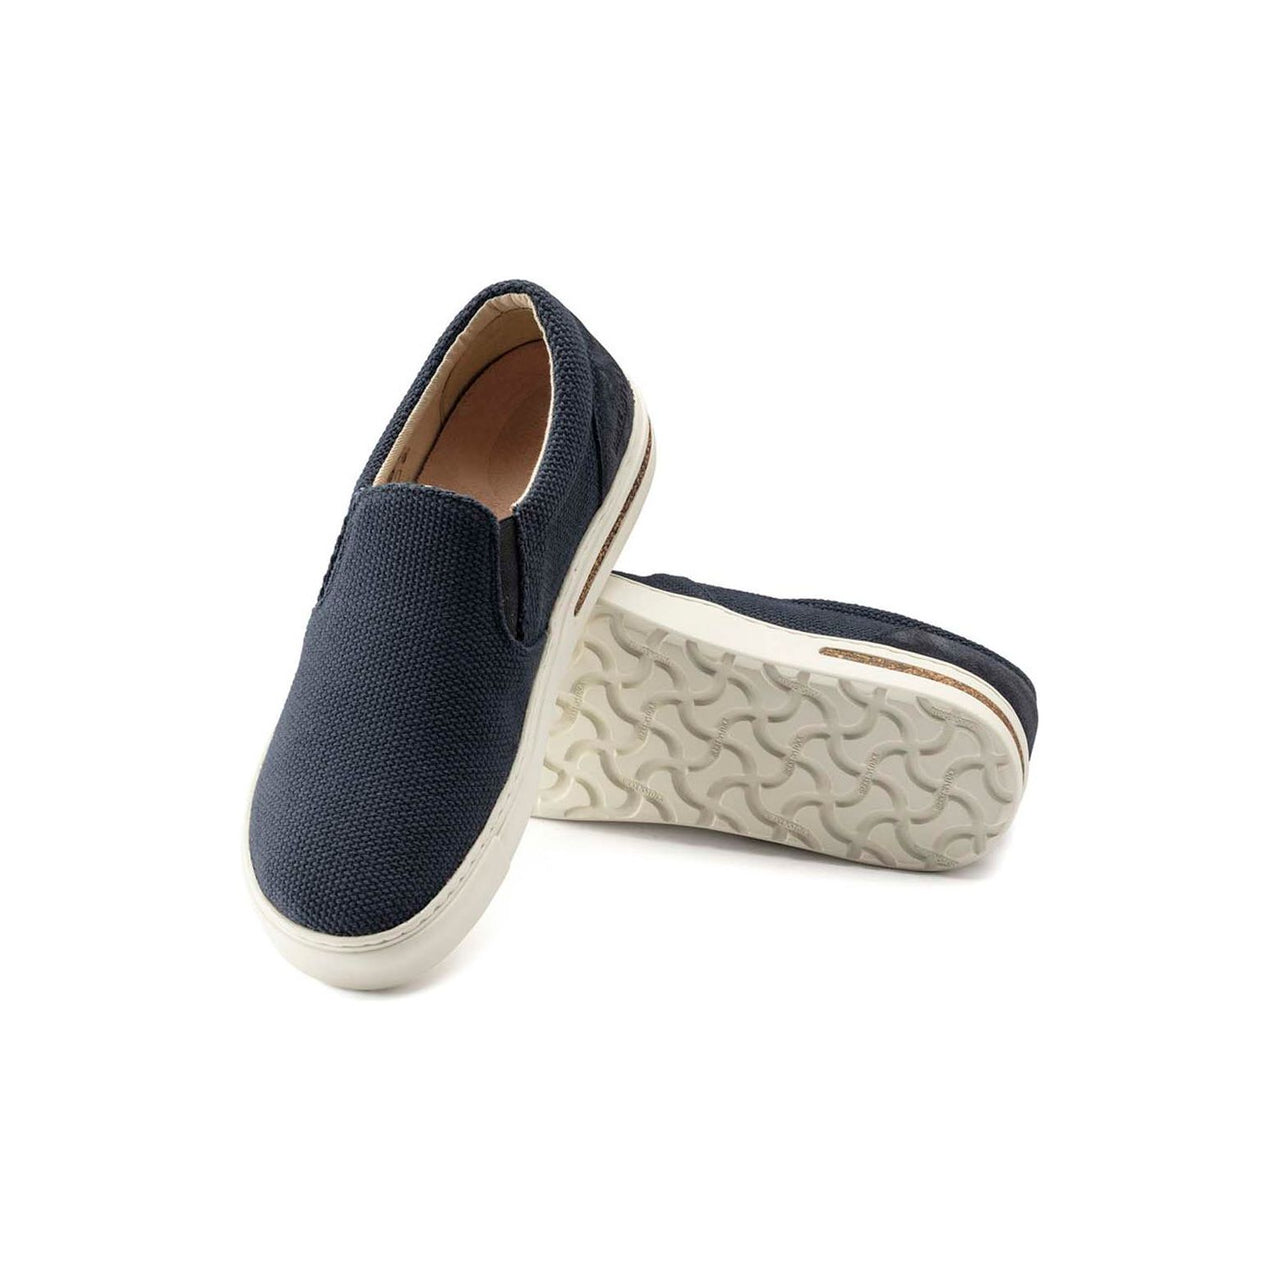 Classic and timeless Oswego Shoes Midnight perfect for casual and formal occasions